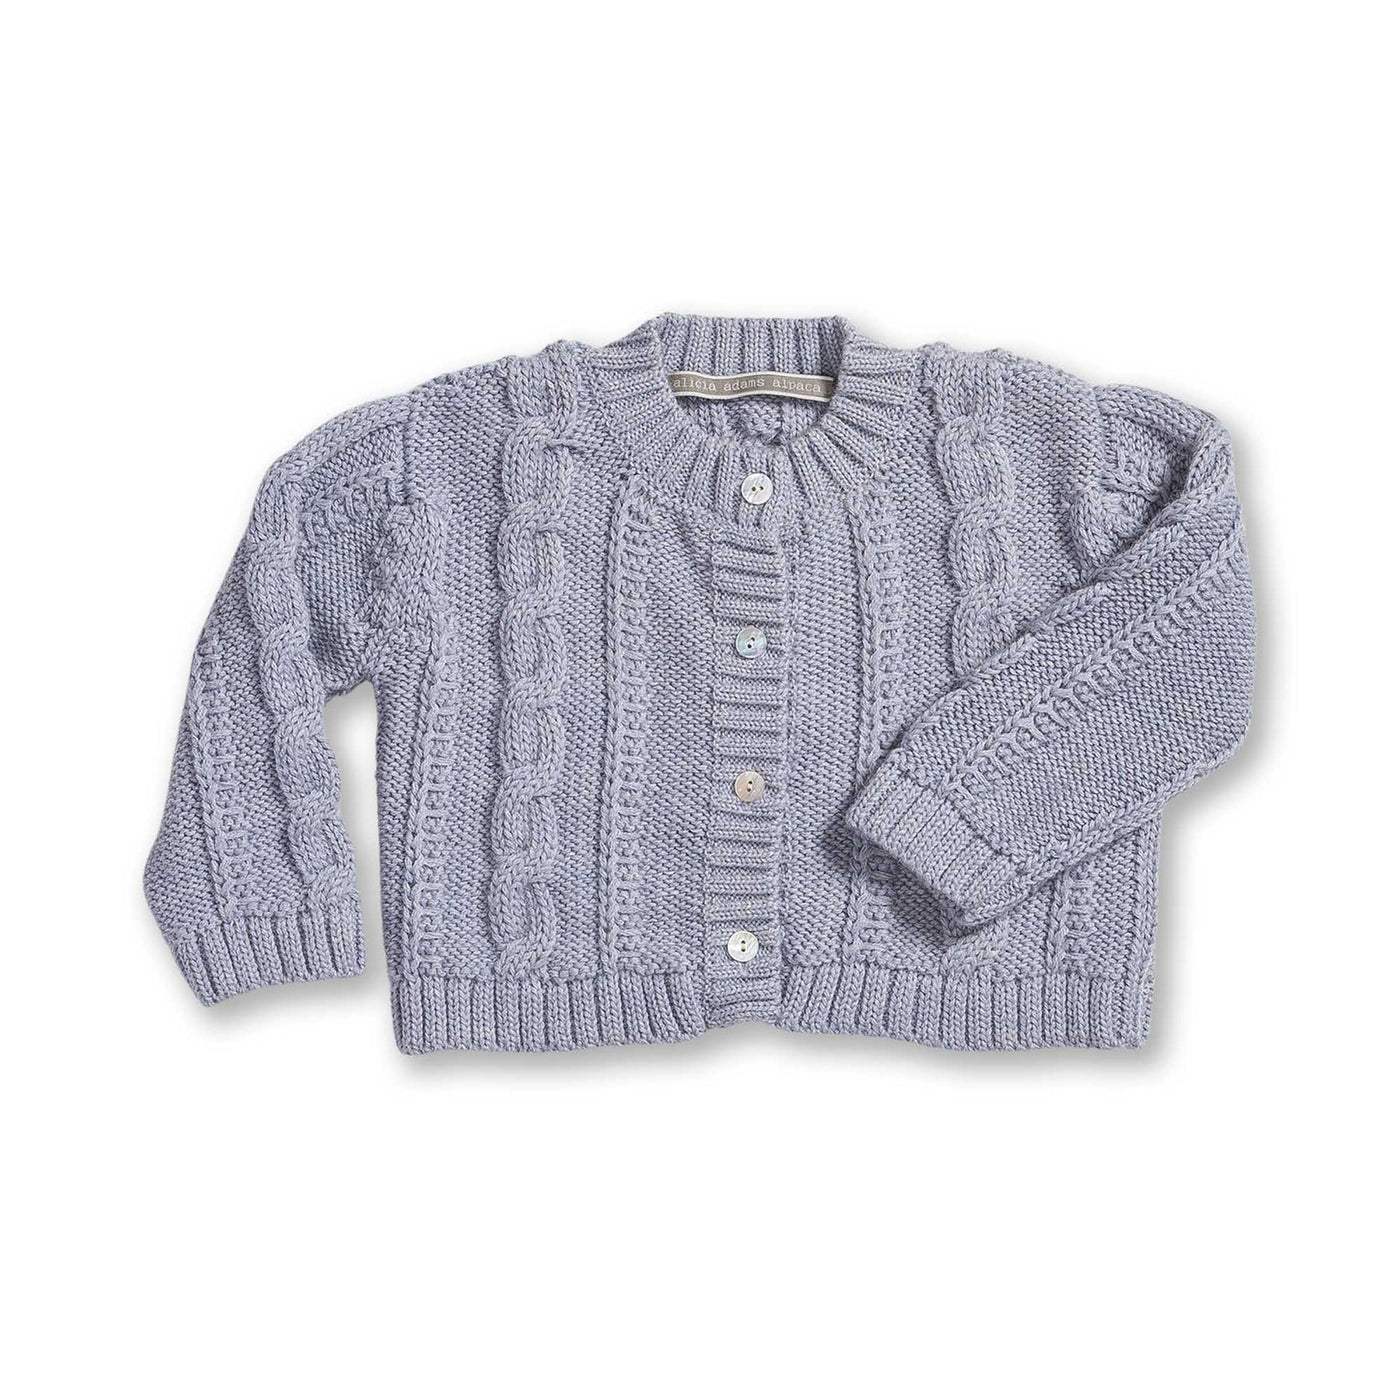 ALICIA ADAMS FAVORITE CARDIGAN BABY ALPACA (Available in Sizes and Colors)